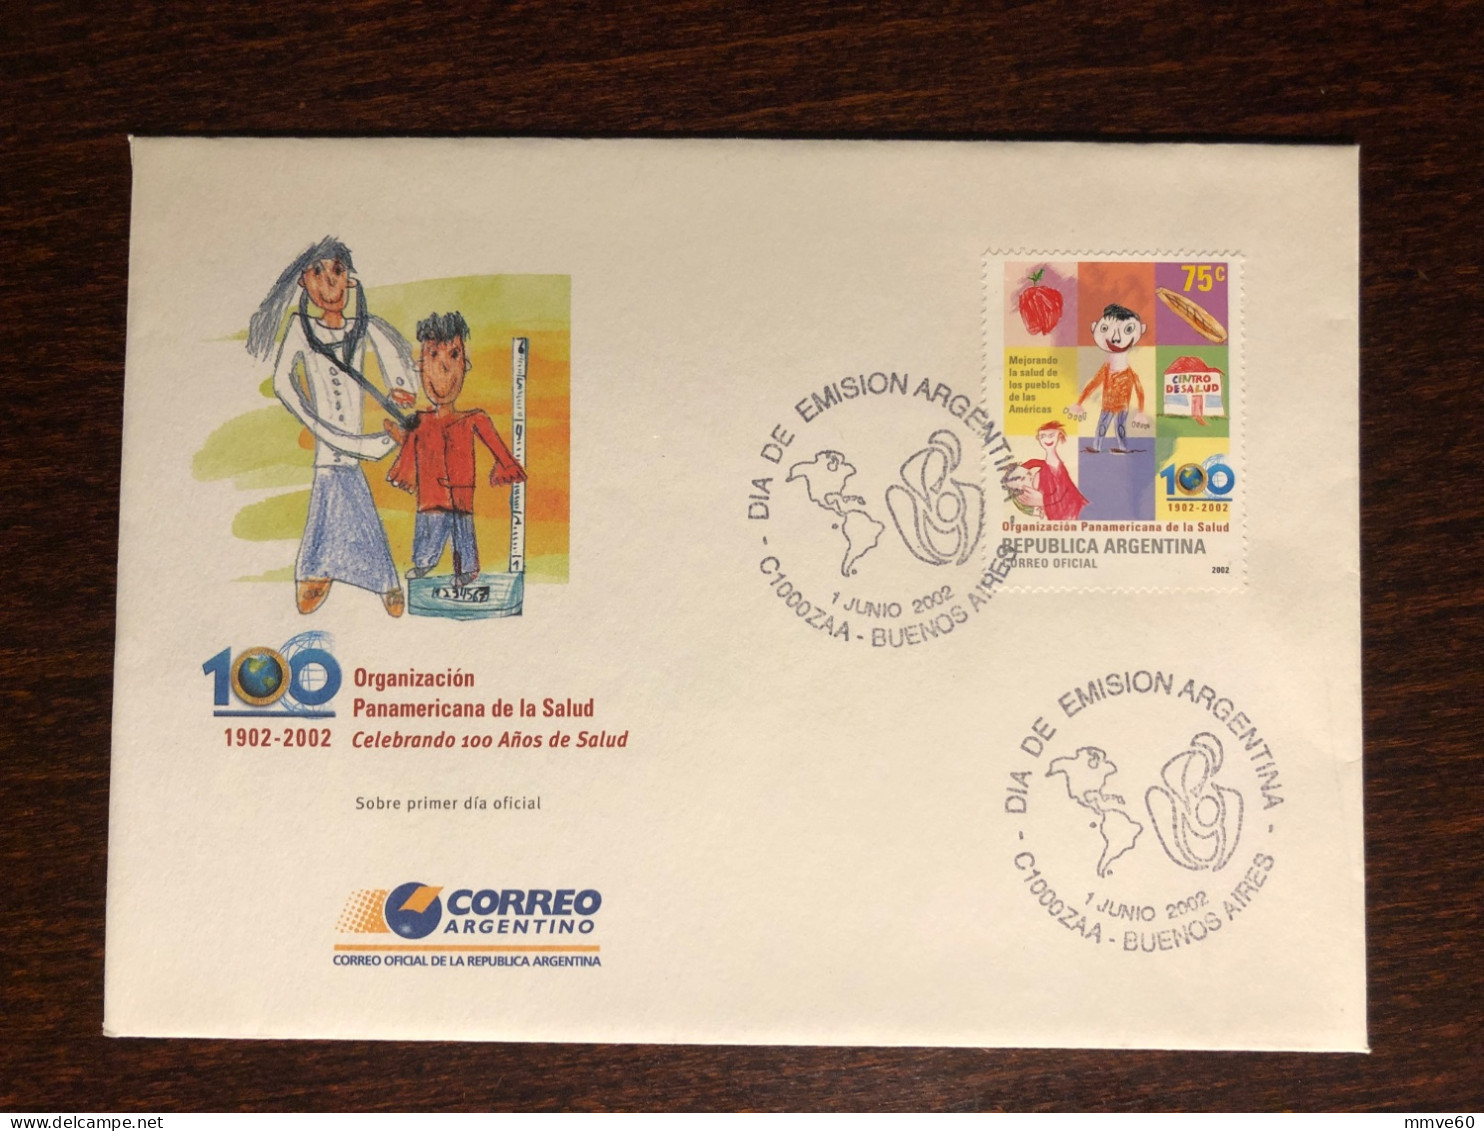 ARGENTINA FDC COVER 2002 YEAR WHO PAHO HEALTH MEDICINE STAMPS - FDC